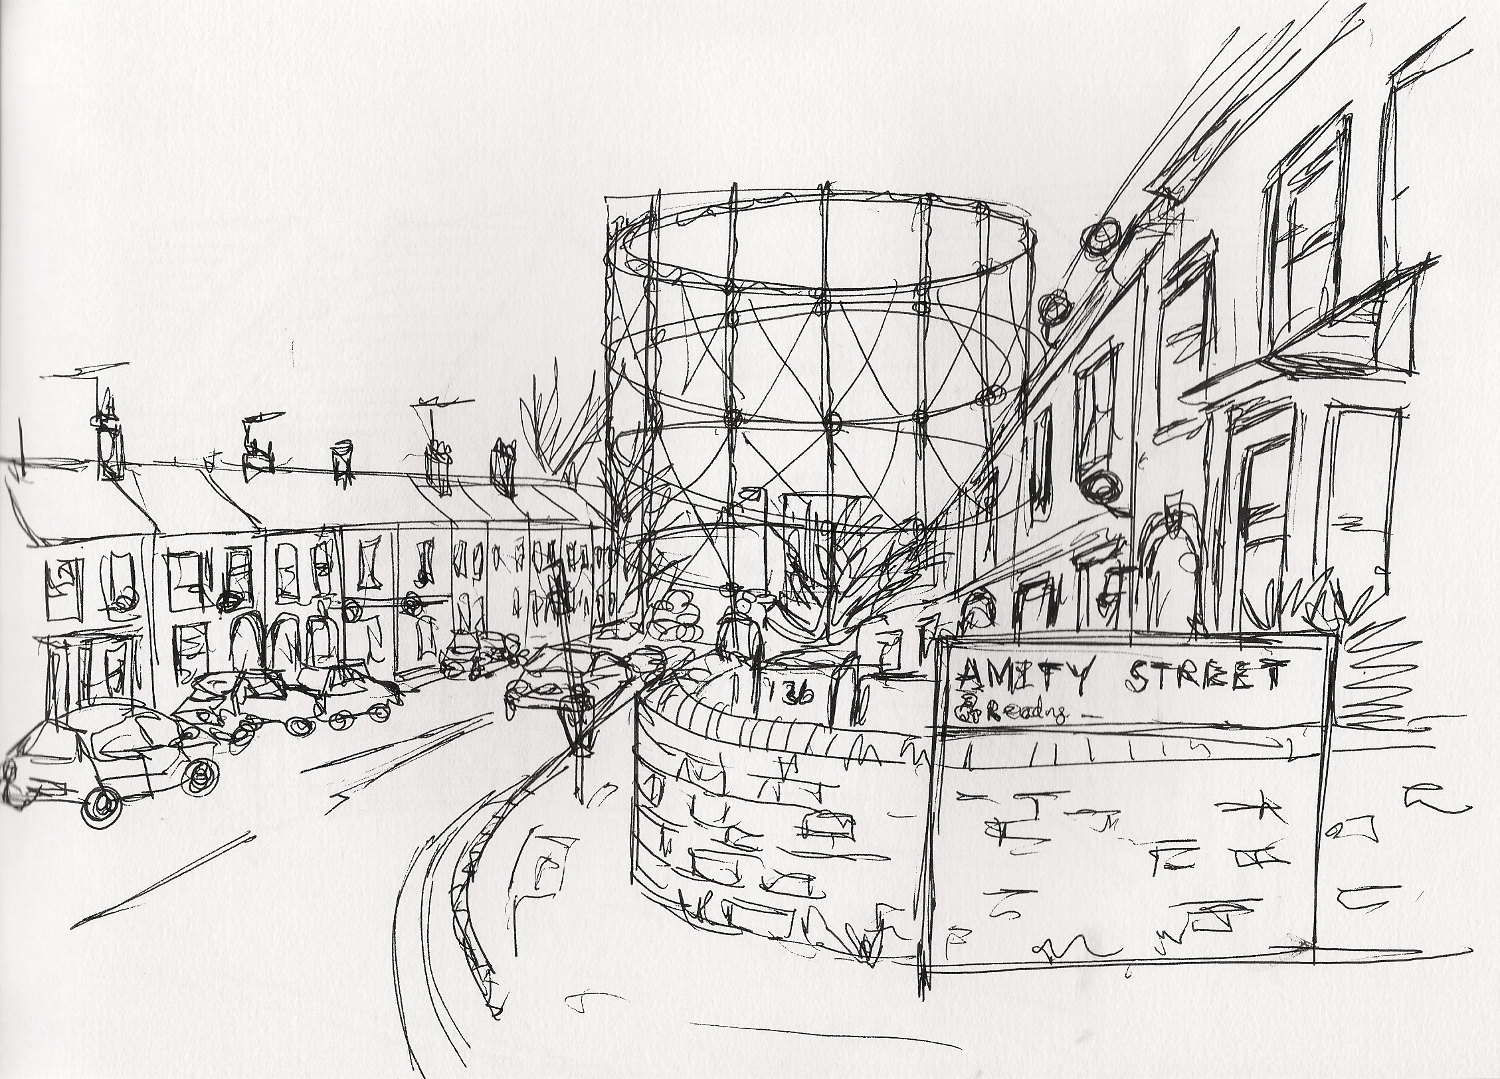 Sketch of Gasholder No.4 from Amity Road by Kate Lockhart, 2013